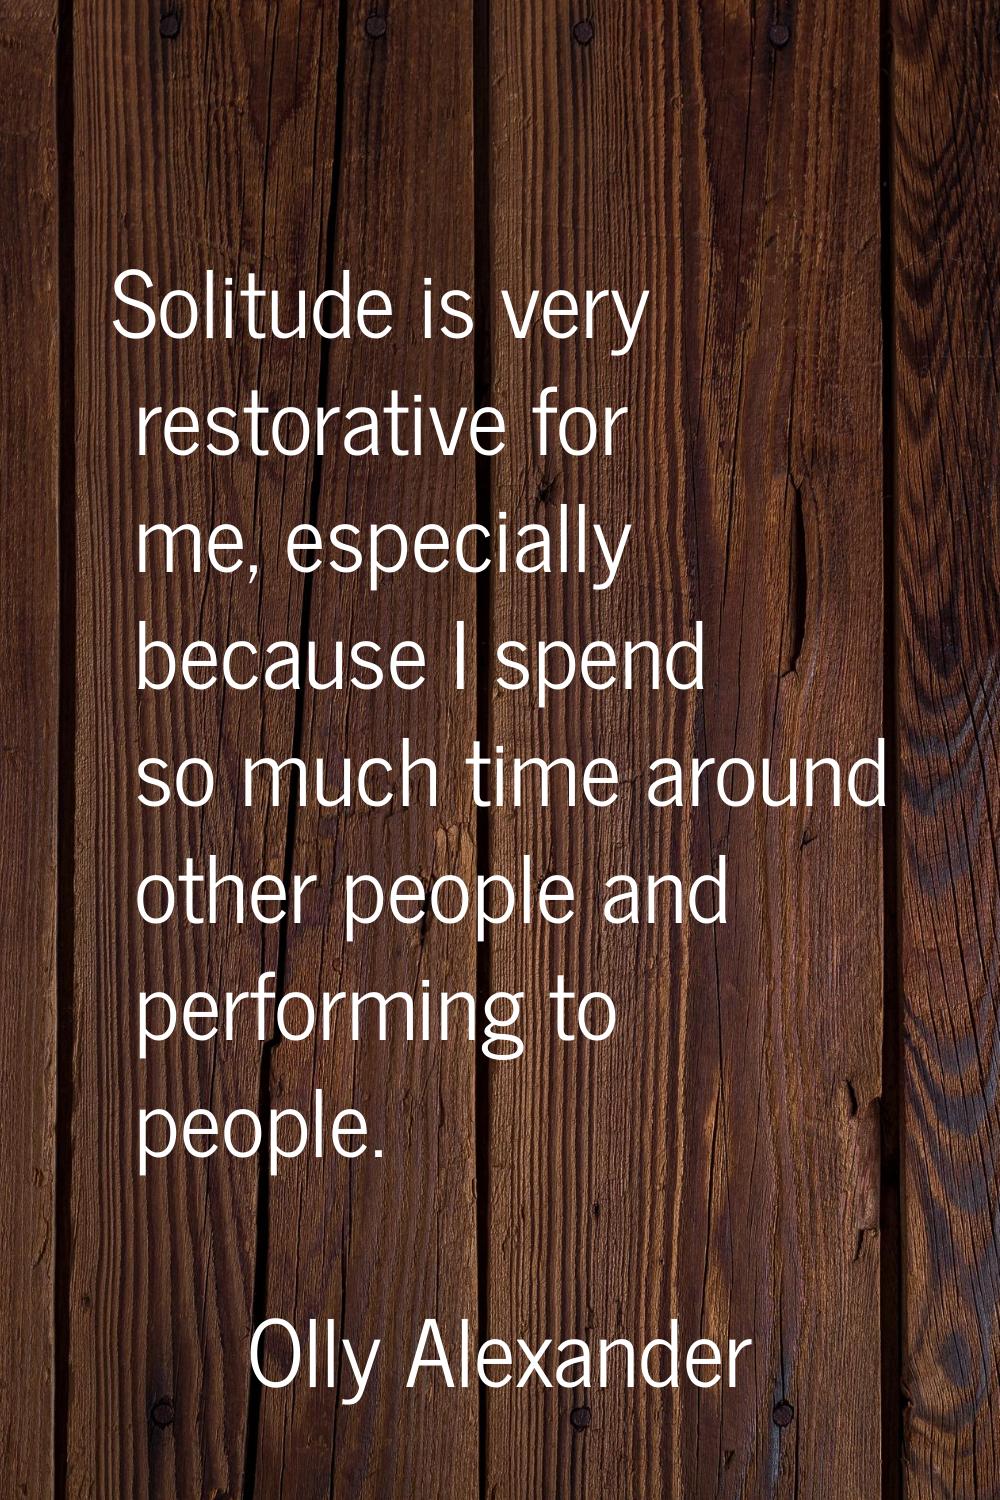 Solitude is very restorative for me, especially because I spend so much time around other people an